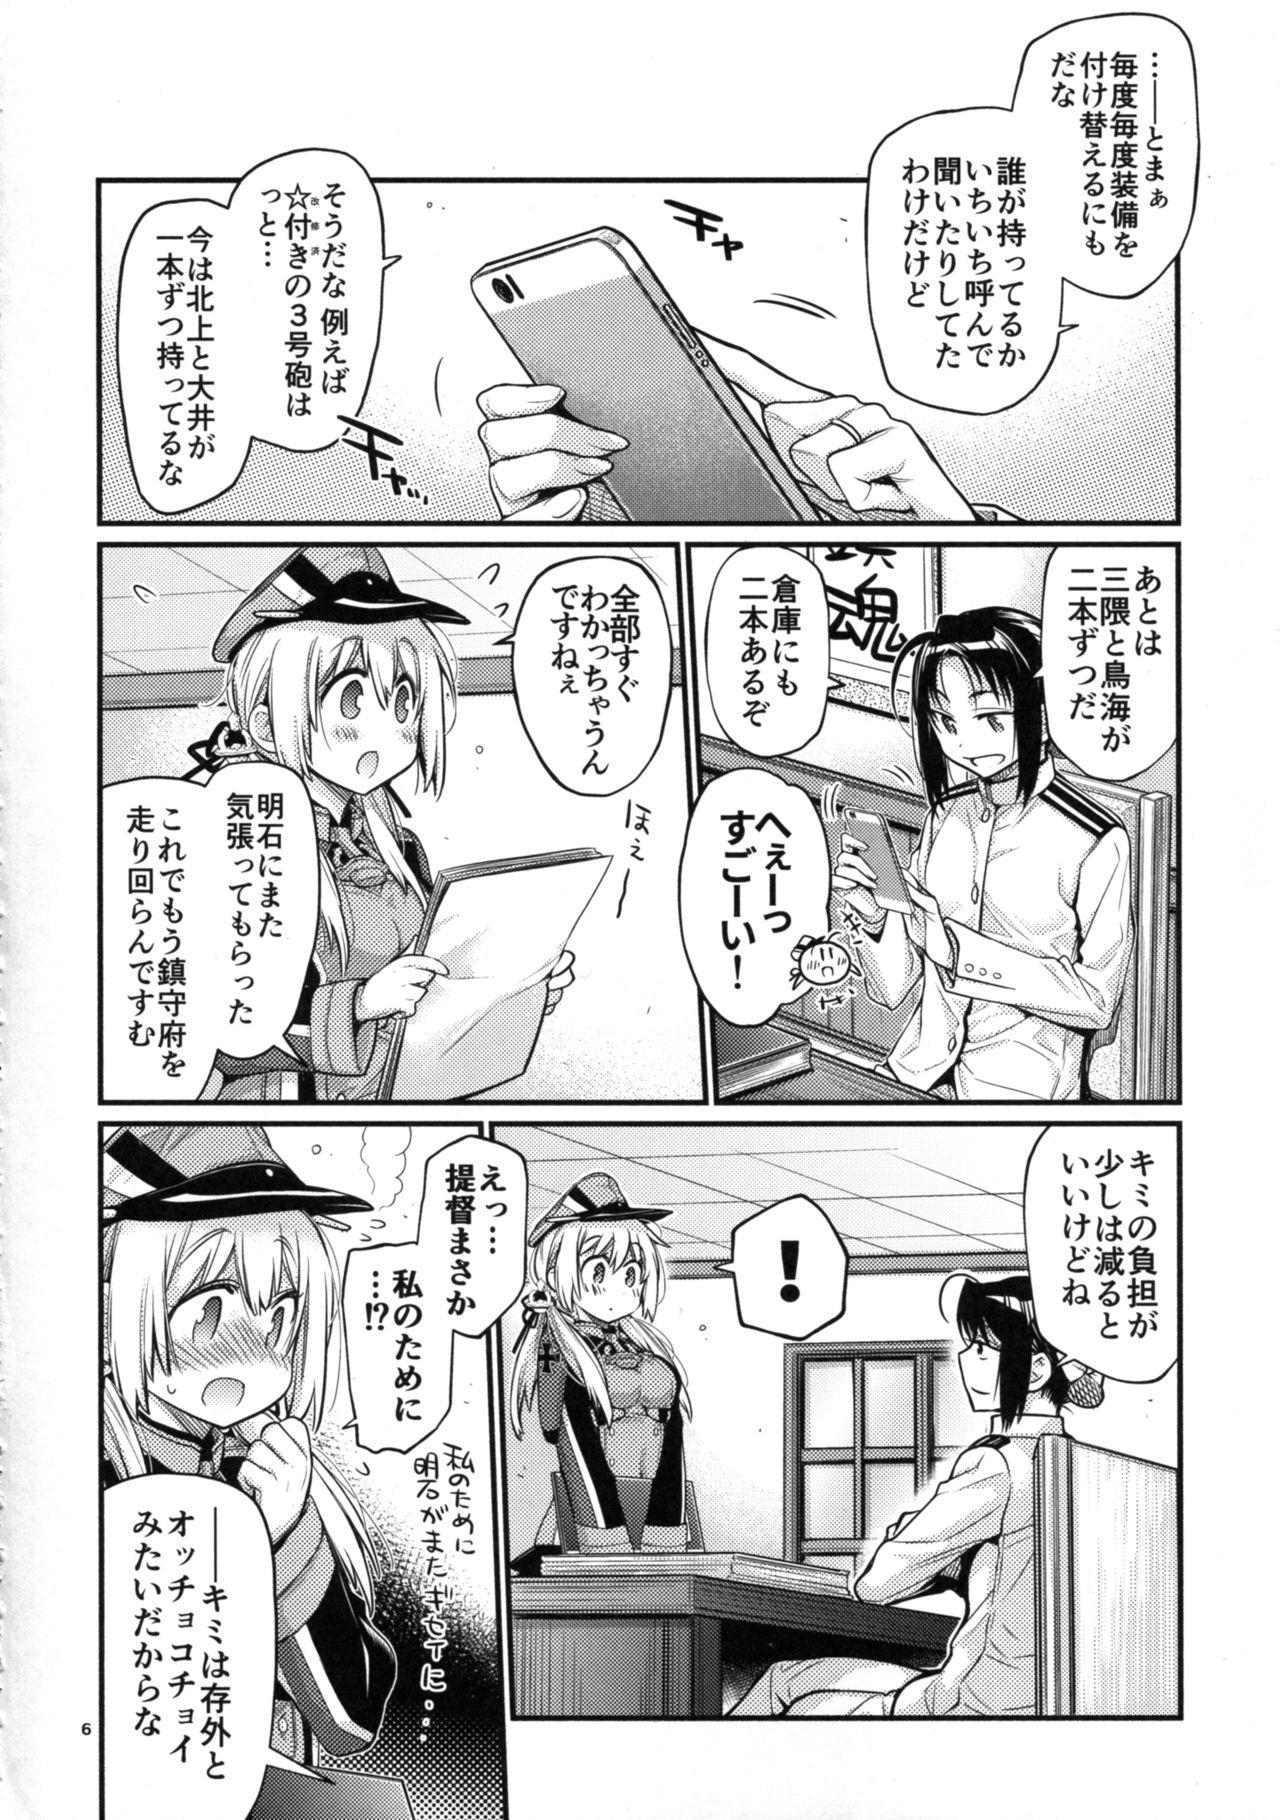 Sola Prinz Pudding 4 - Kantai collection Chat - Page 6